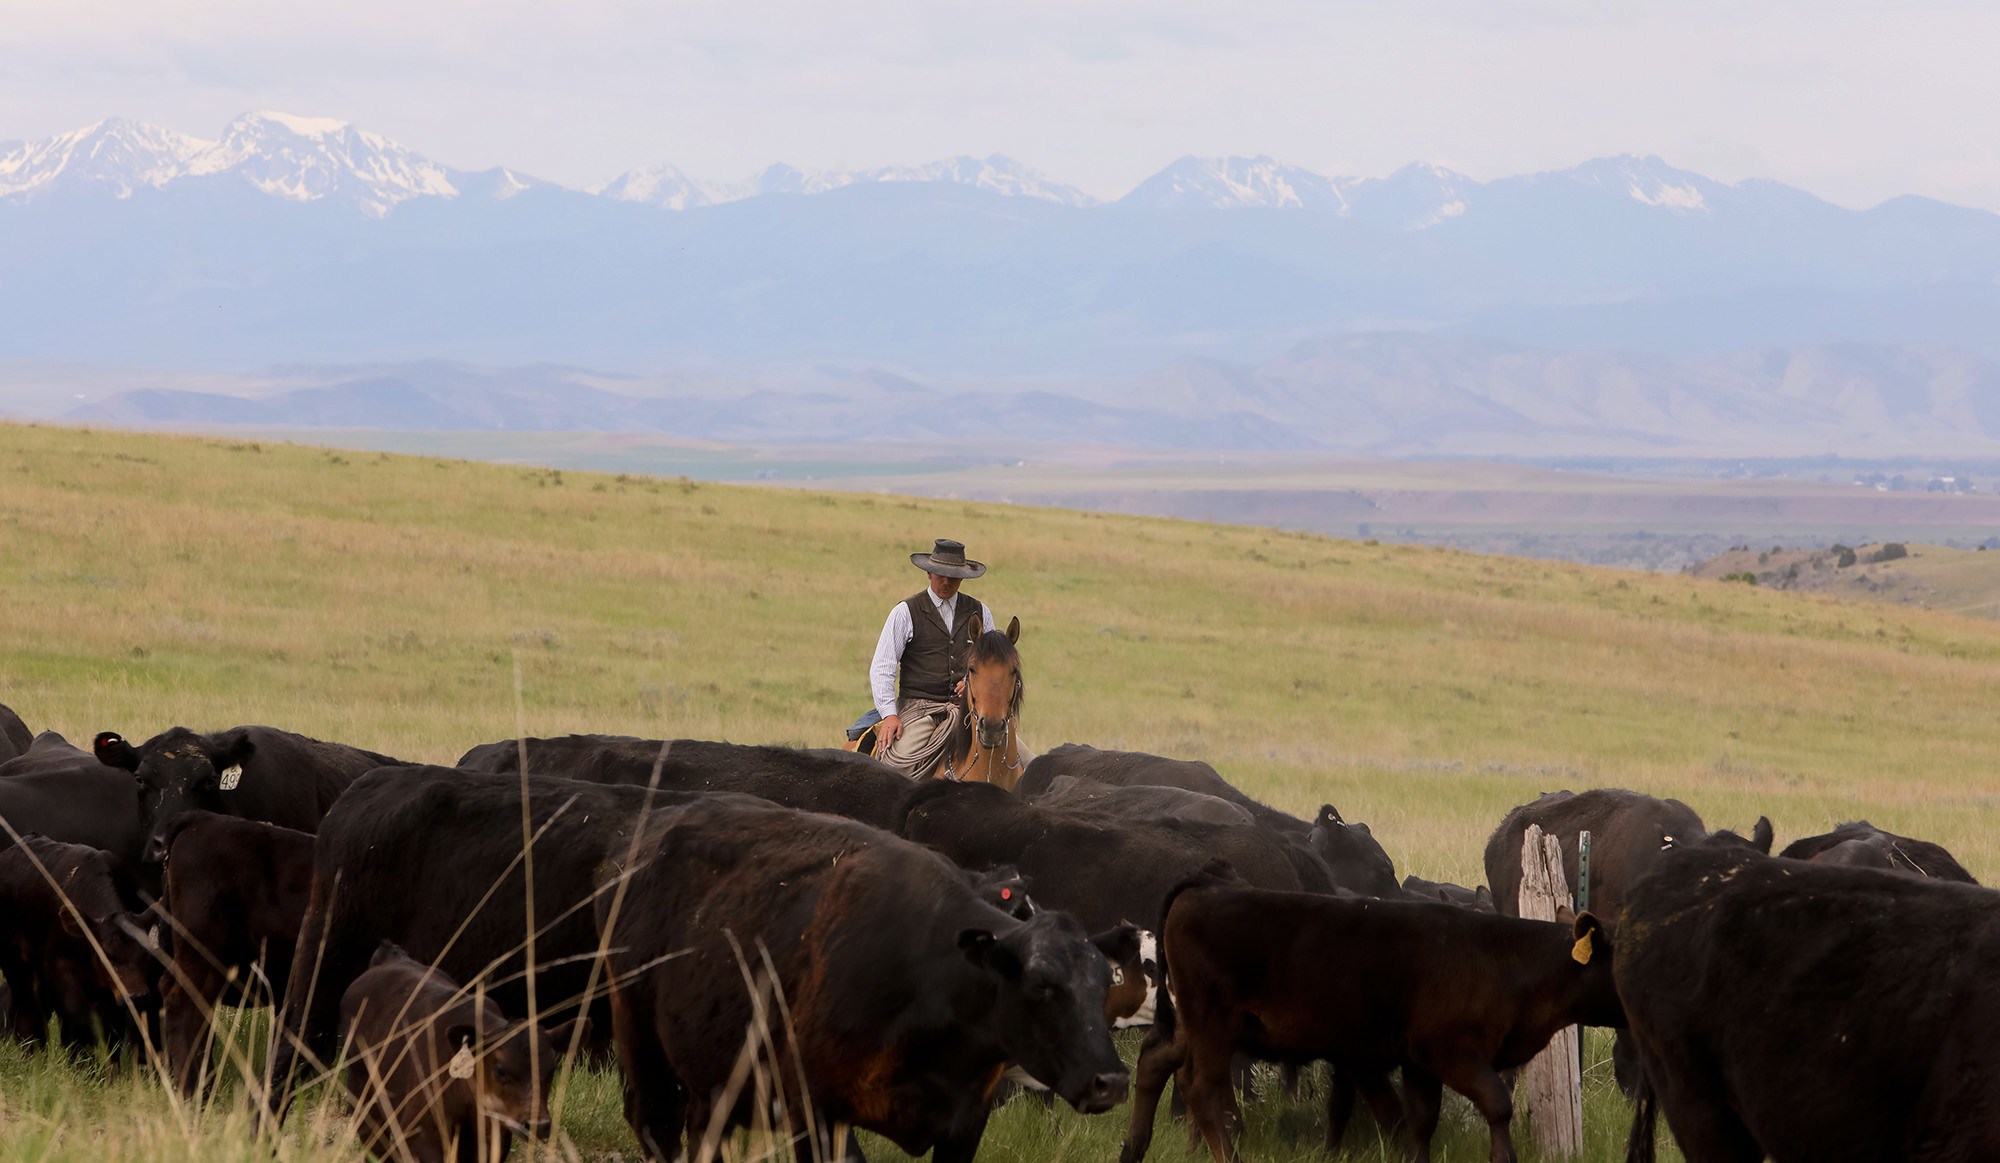 Sale of ranch asking $136.25 million breaks Montana record, agent